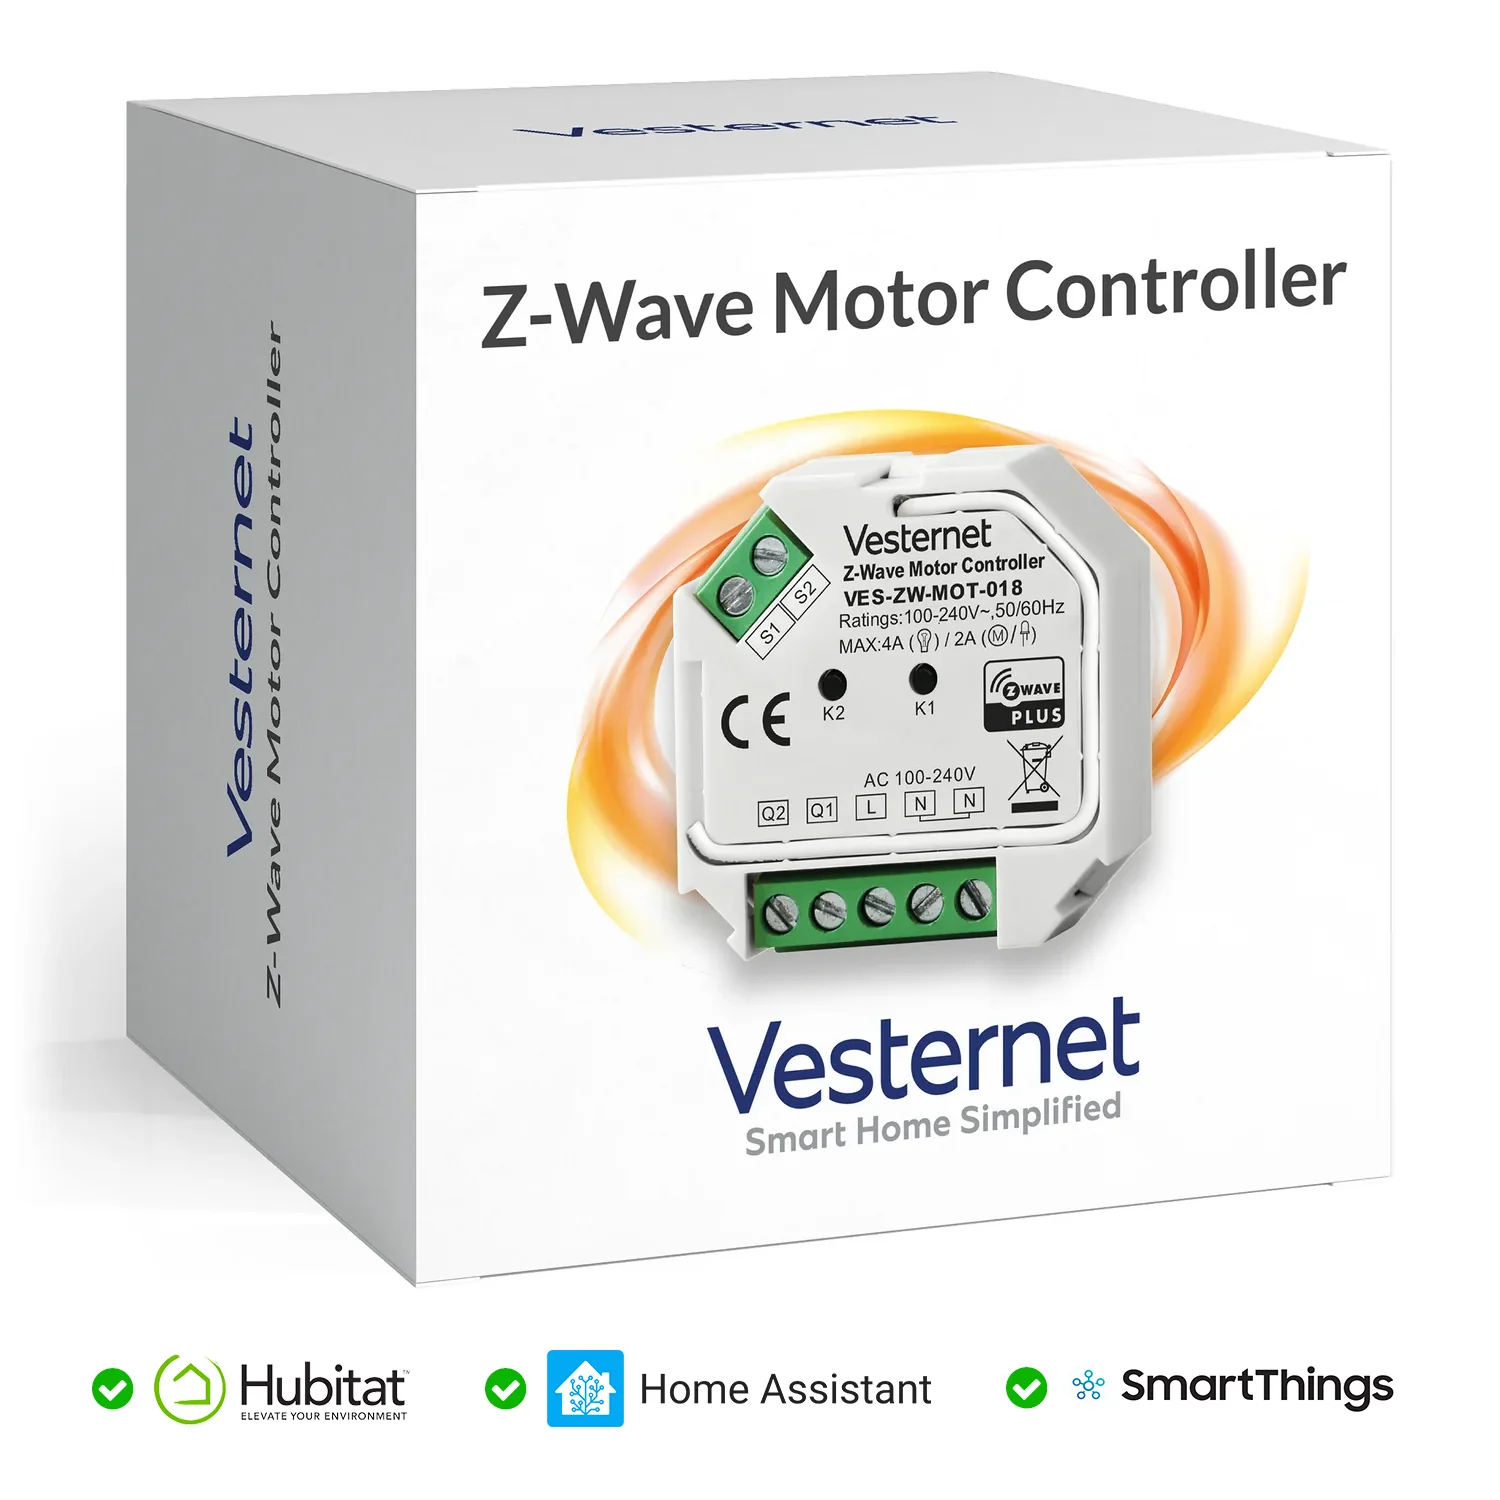 Vesternet Z-Wave Motor Controller Questions & Answers